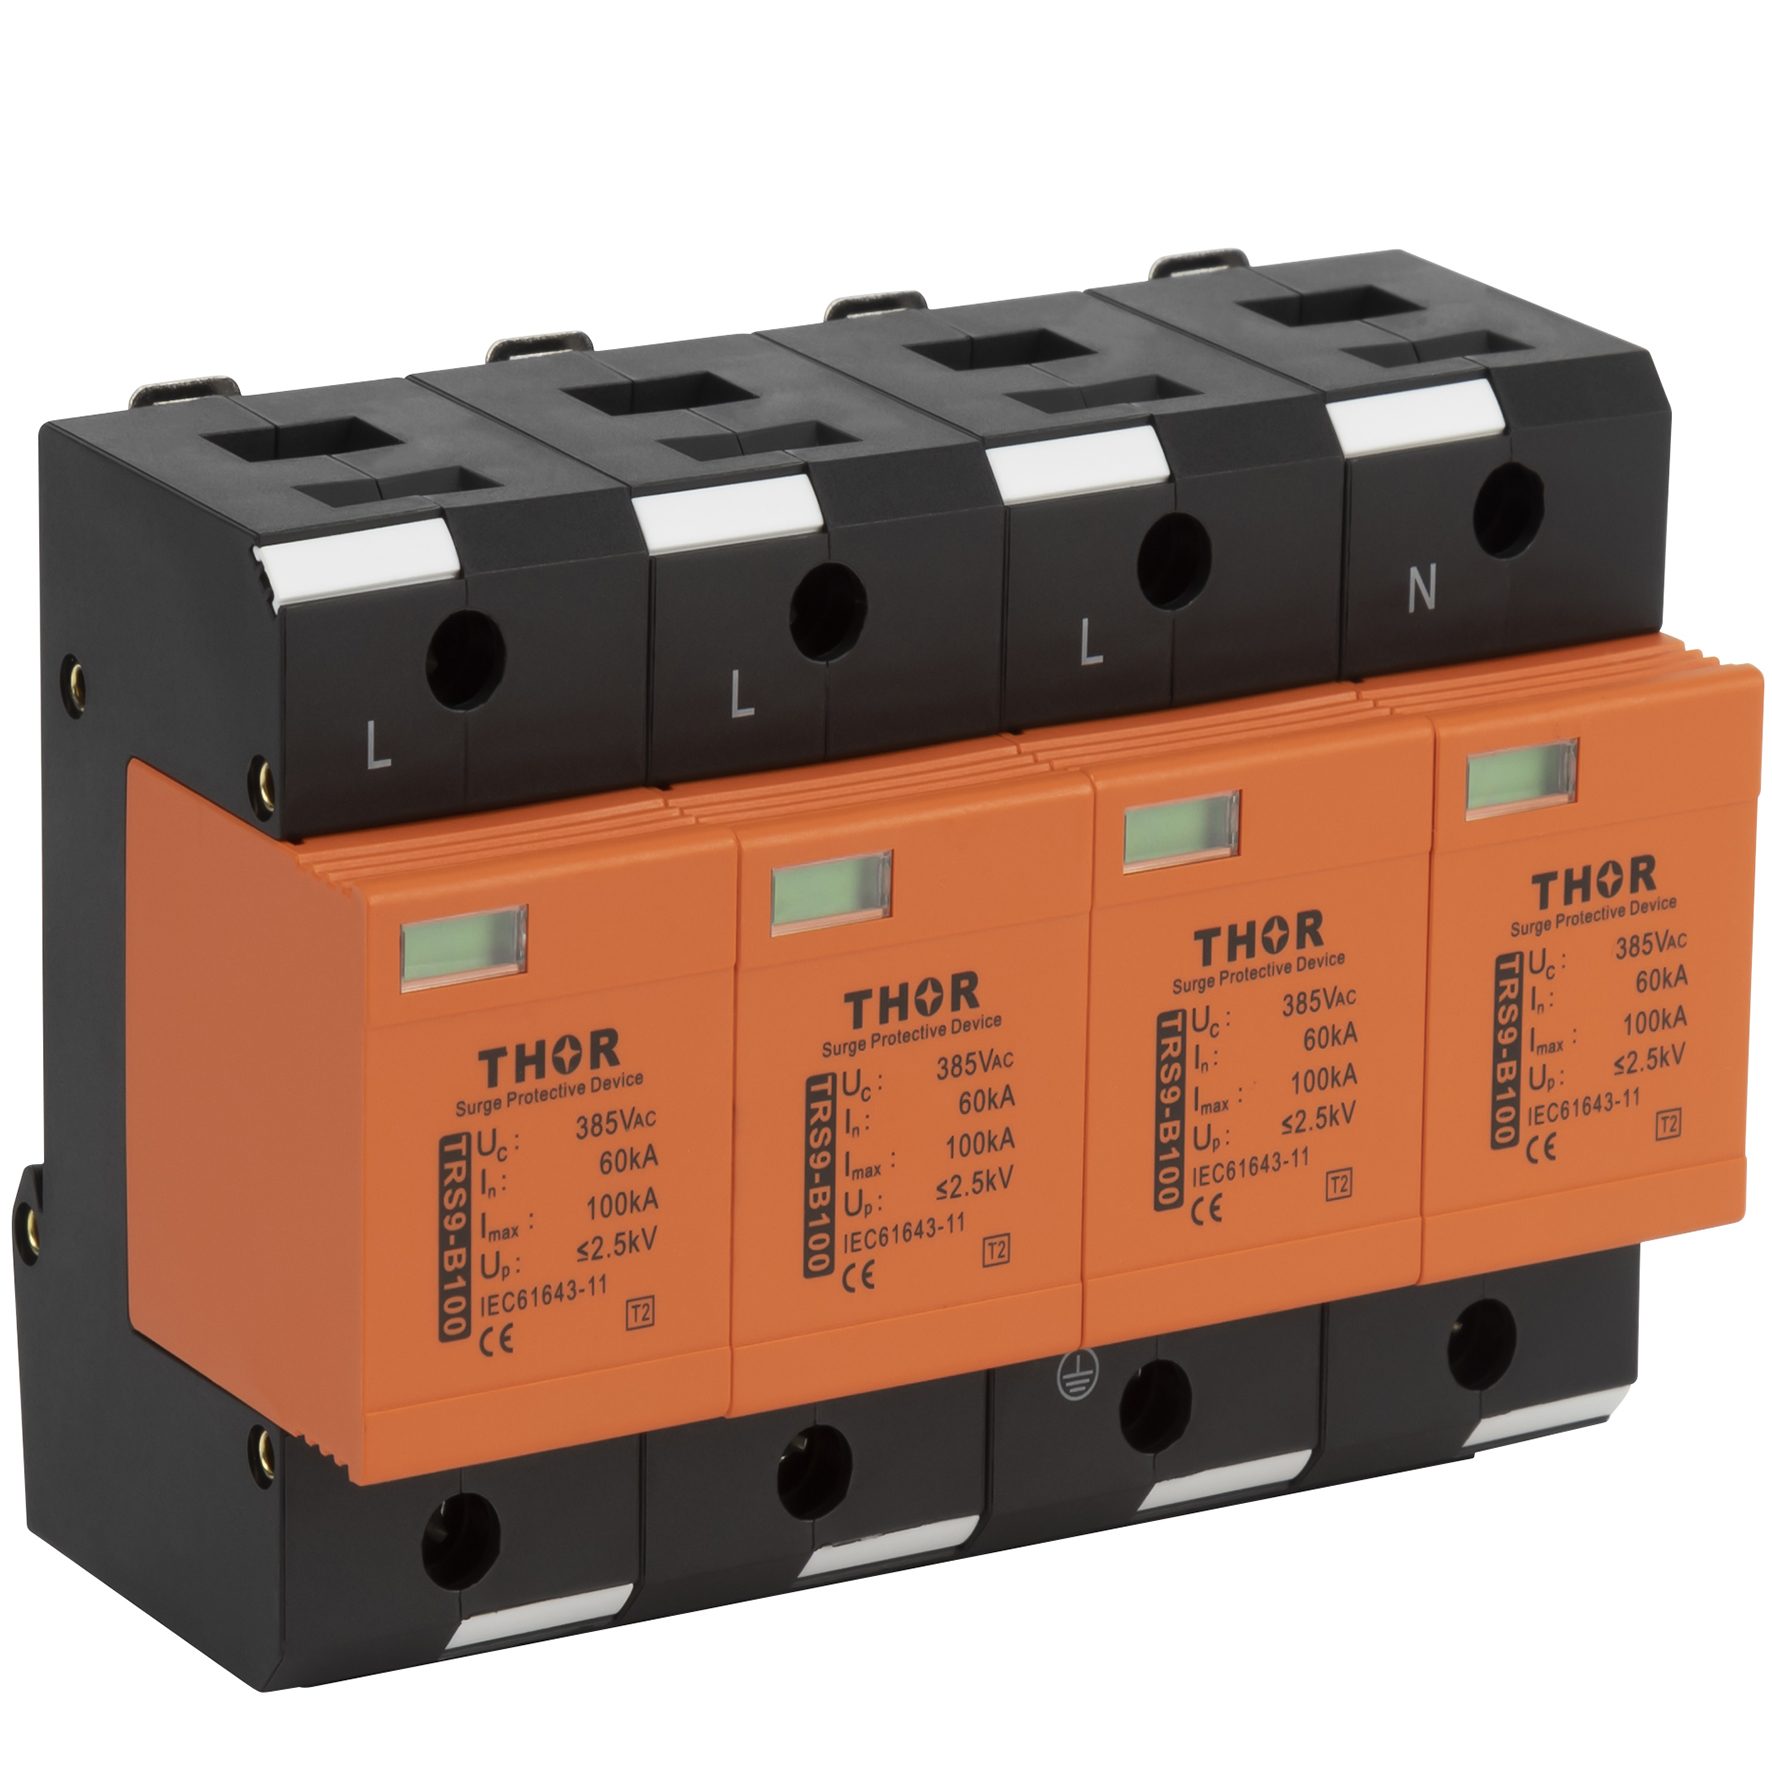 power surge protector,surge protection device,surge protector,spd,surge protection,lightning protection